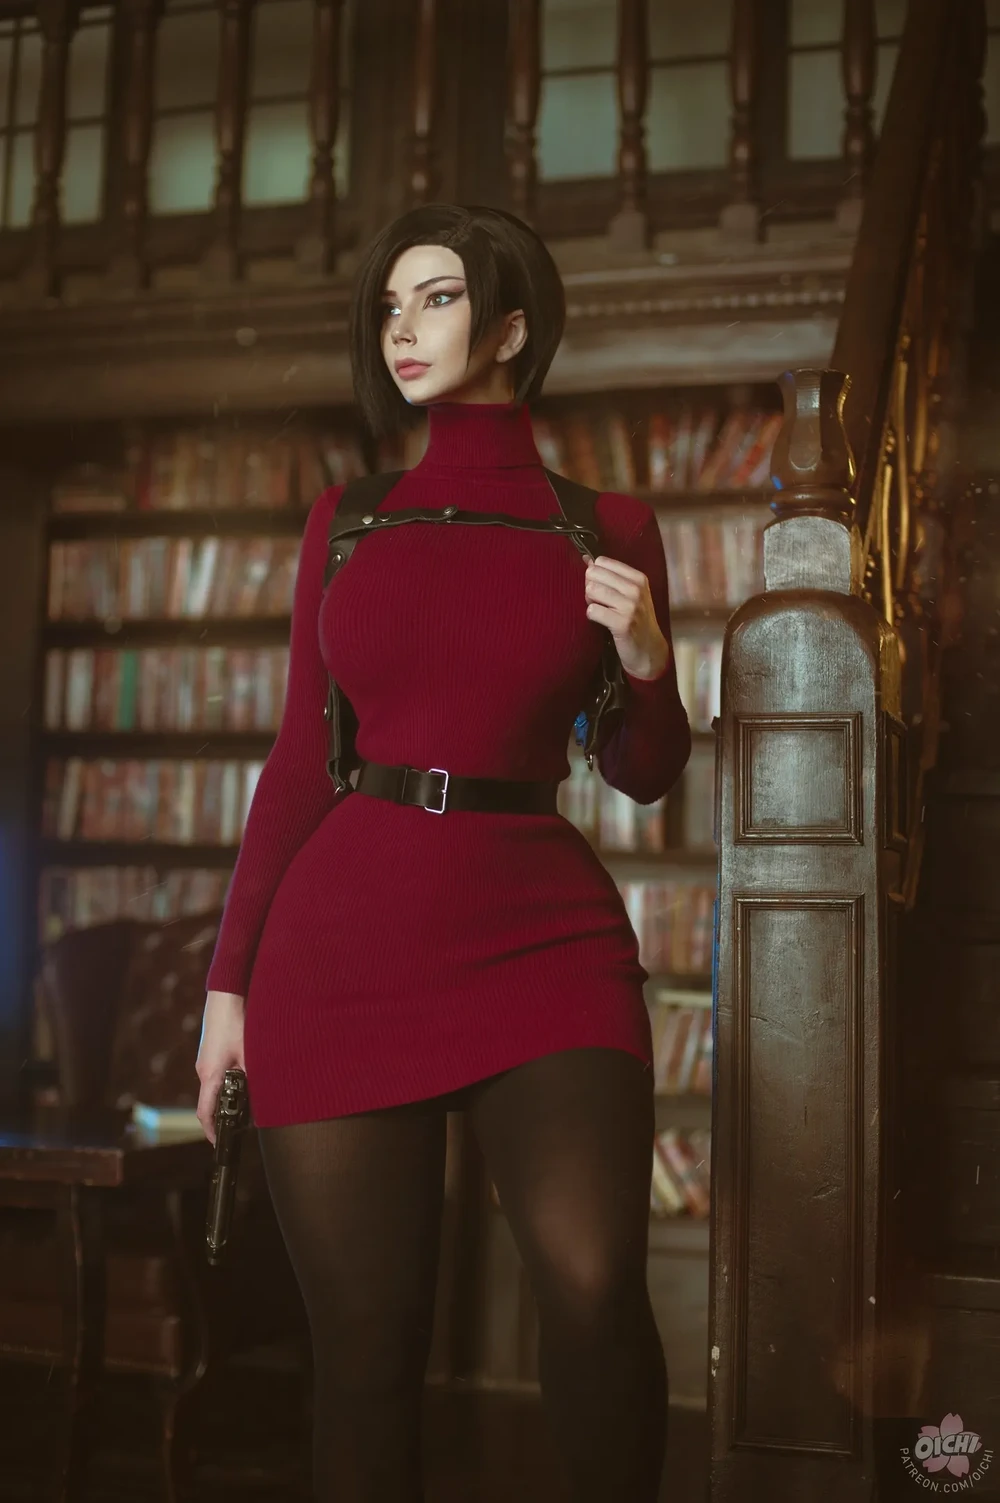 Ada Wong from Resident Evil in a new image: OICHI cosplayer impressed with her talent - photo №57964